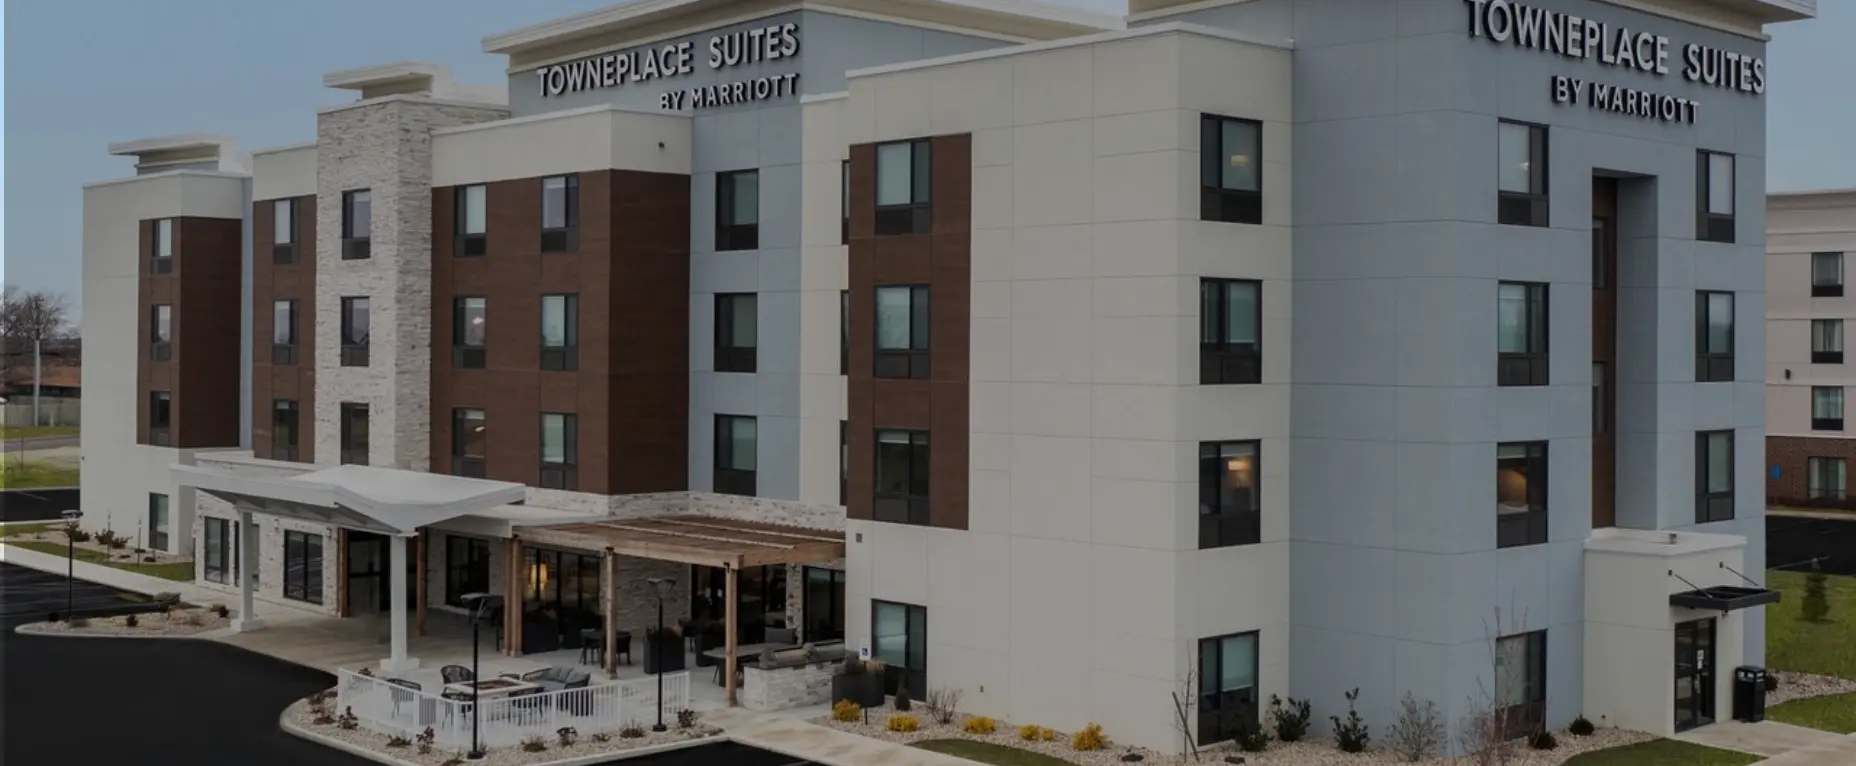 townplace suites by marriott sidney